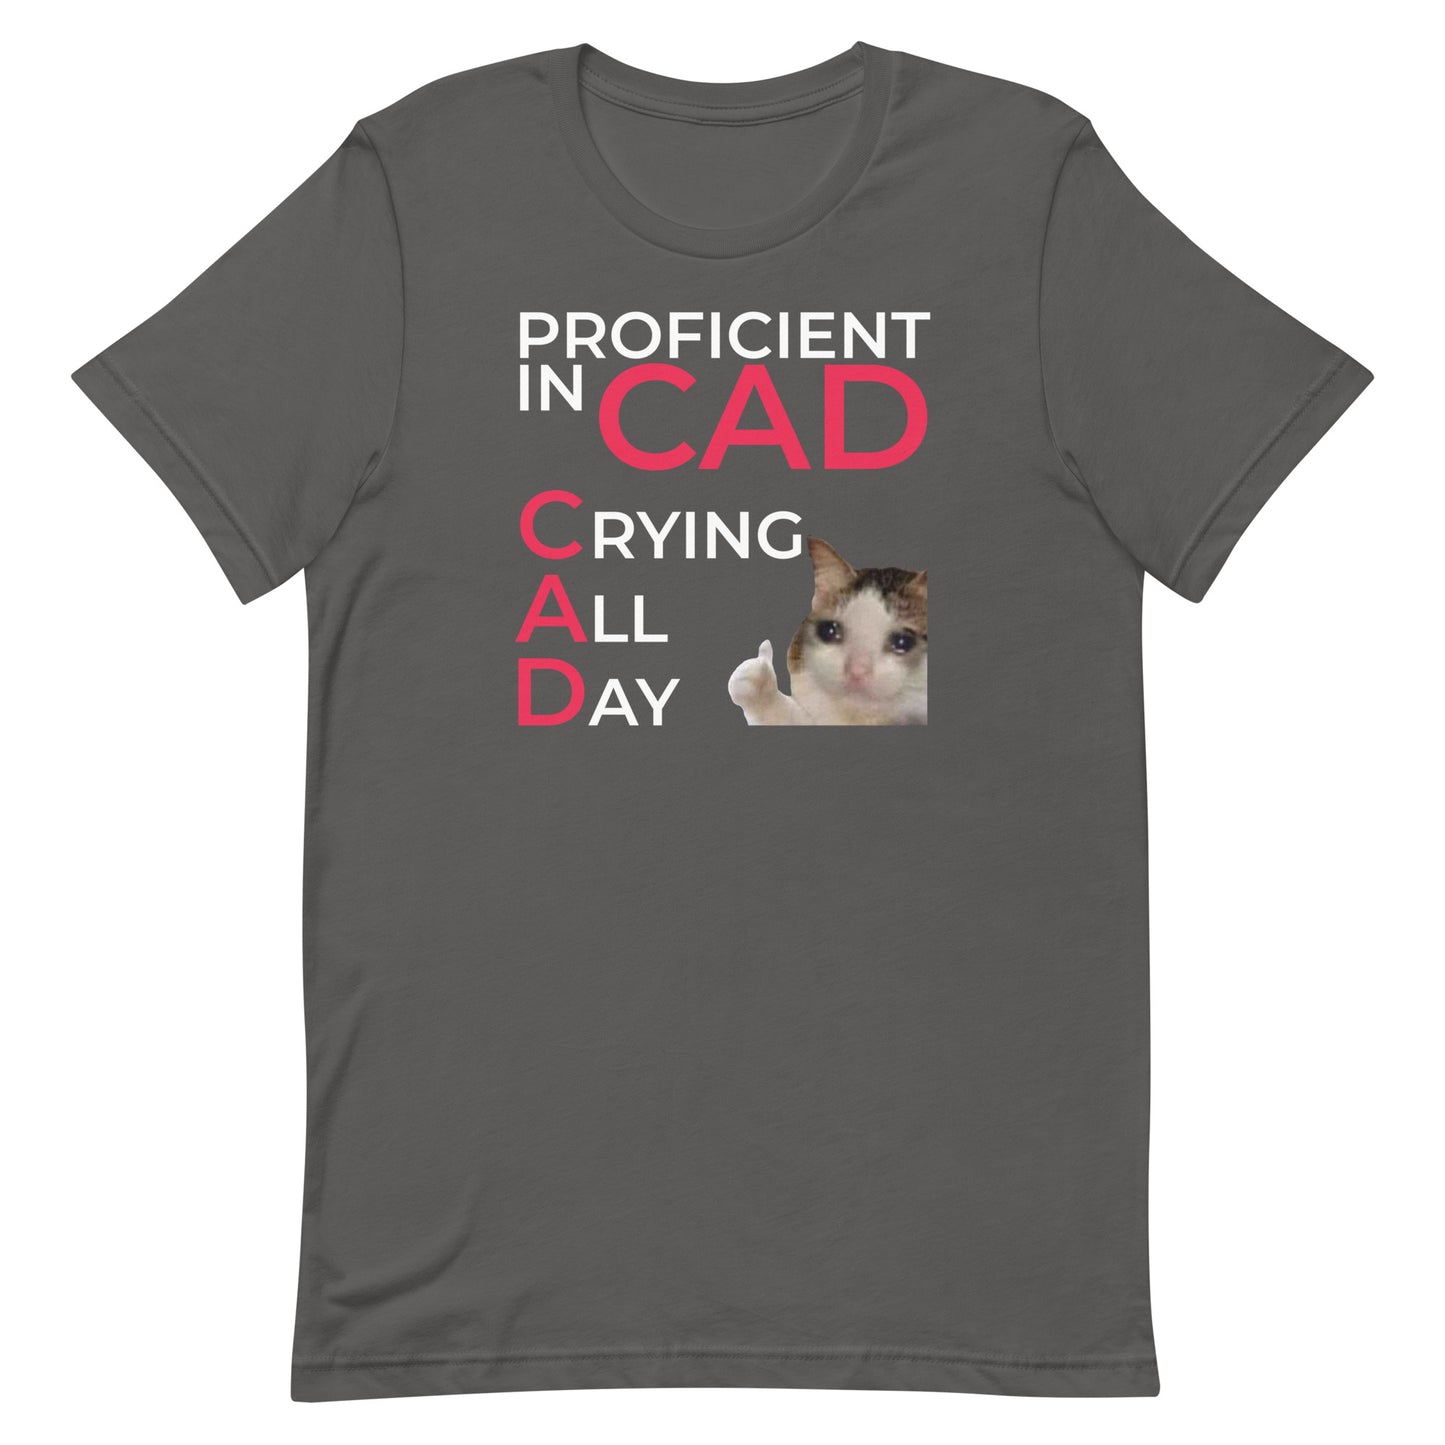 Proficient In CAD (Crying All Day) Unisex t-shirt